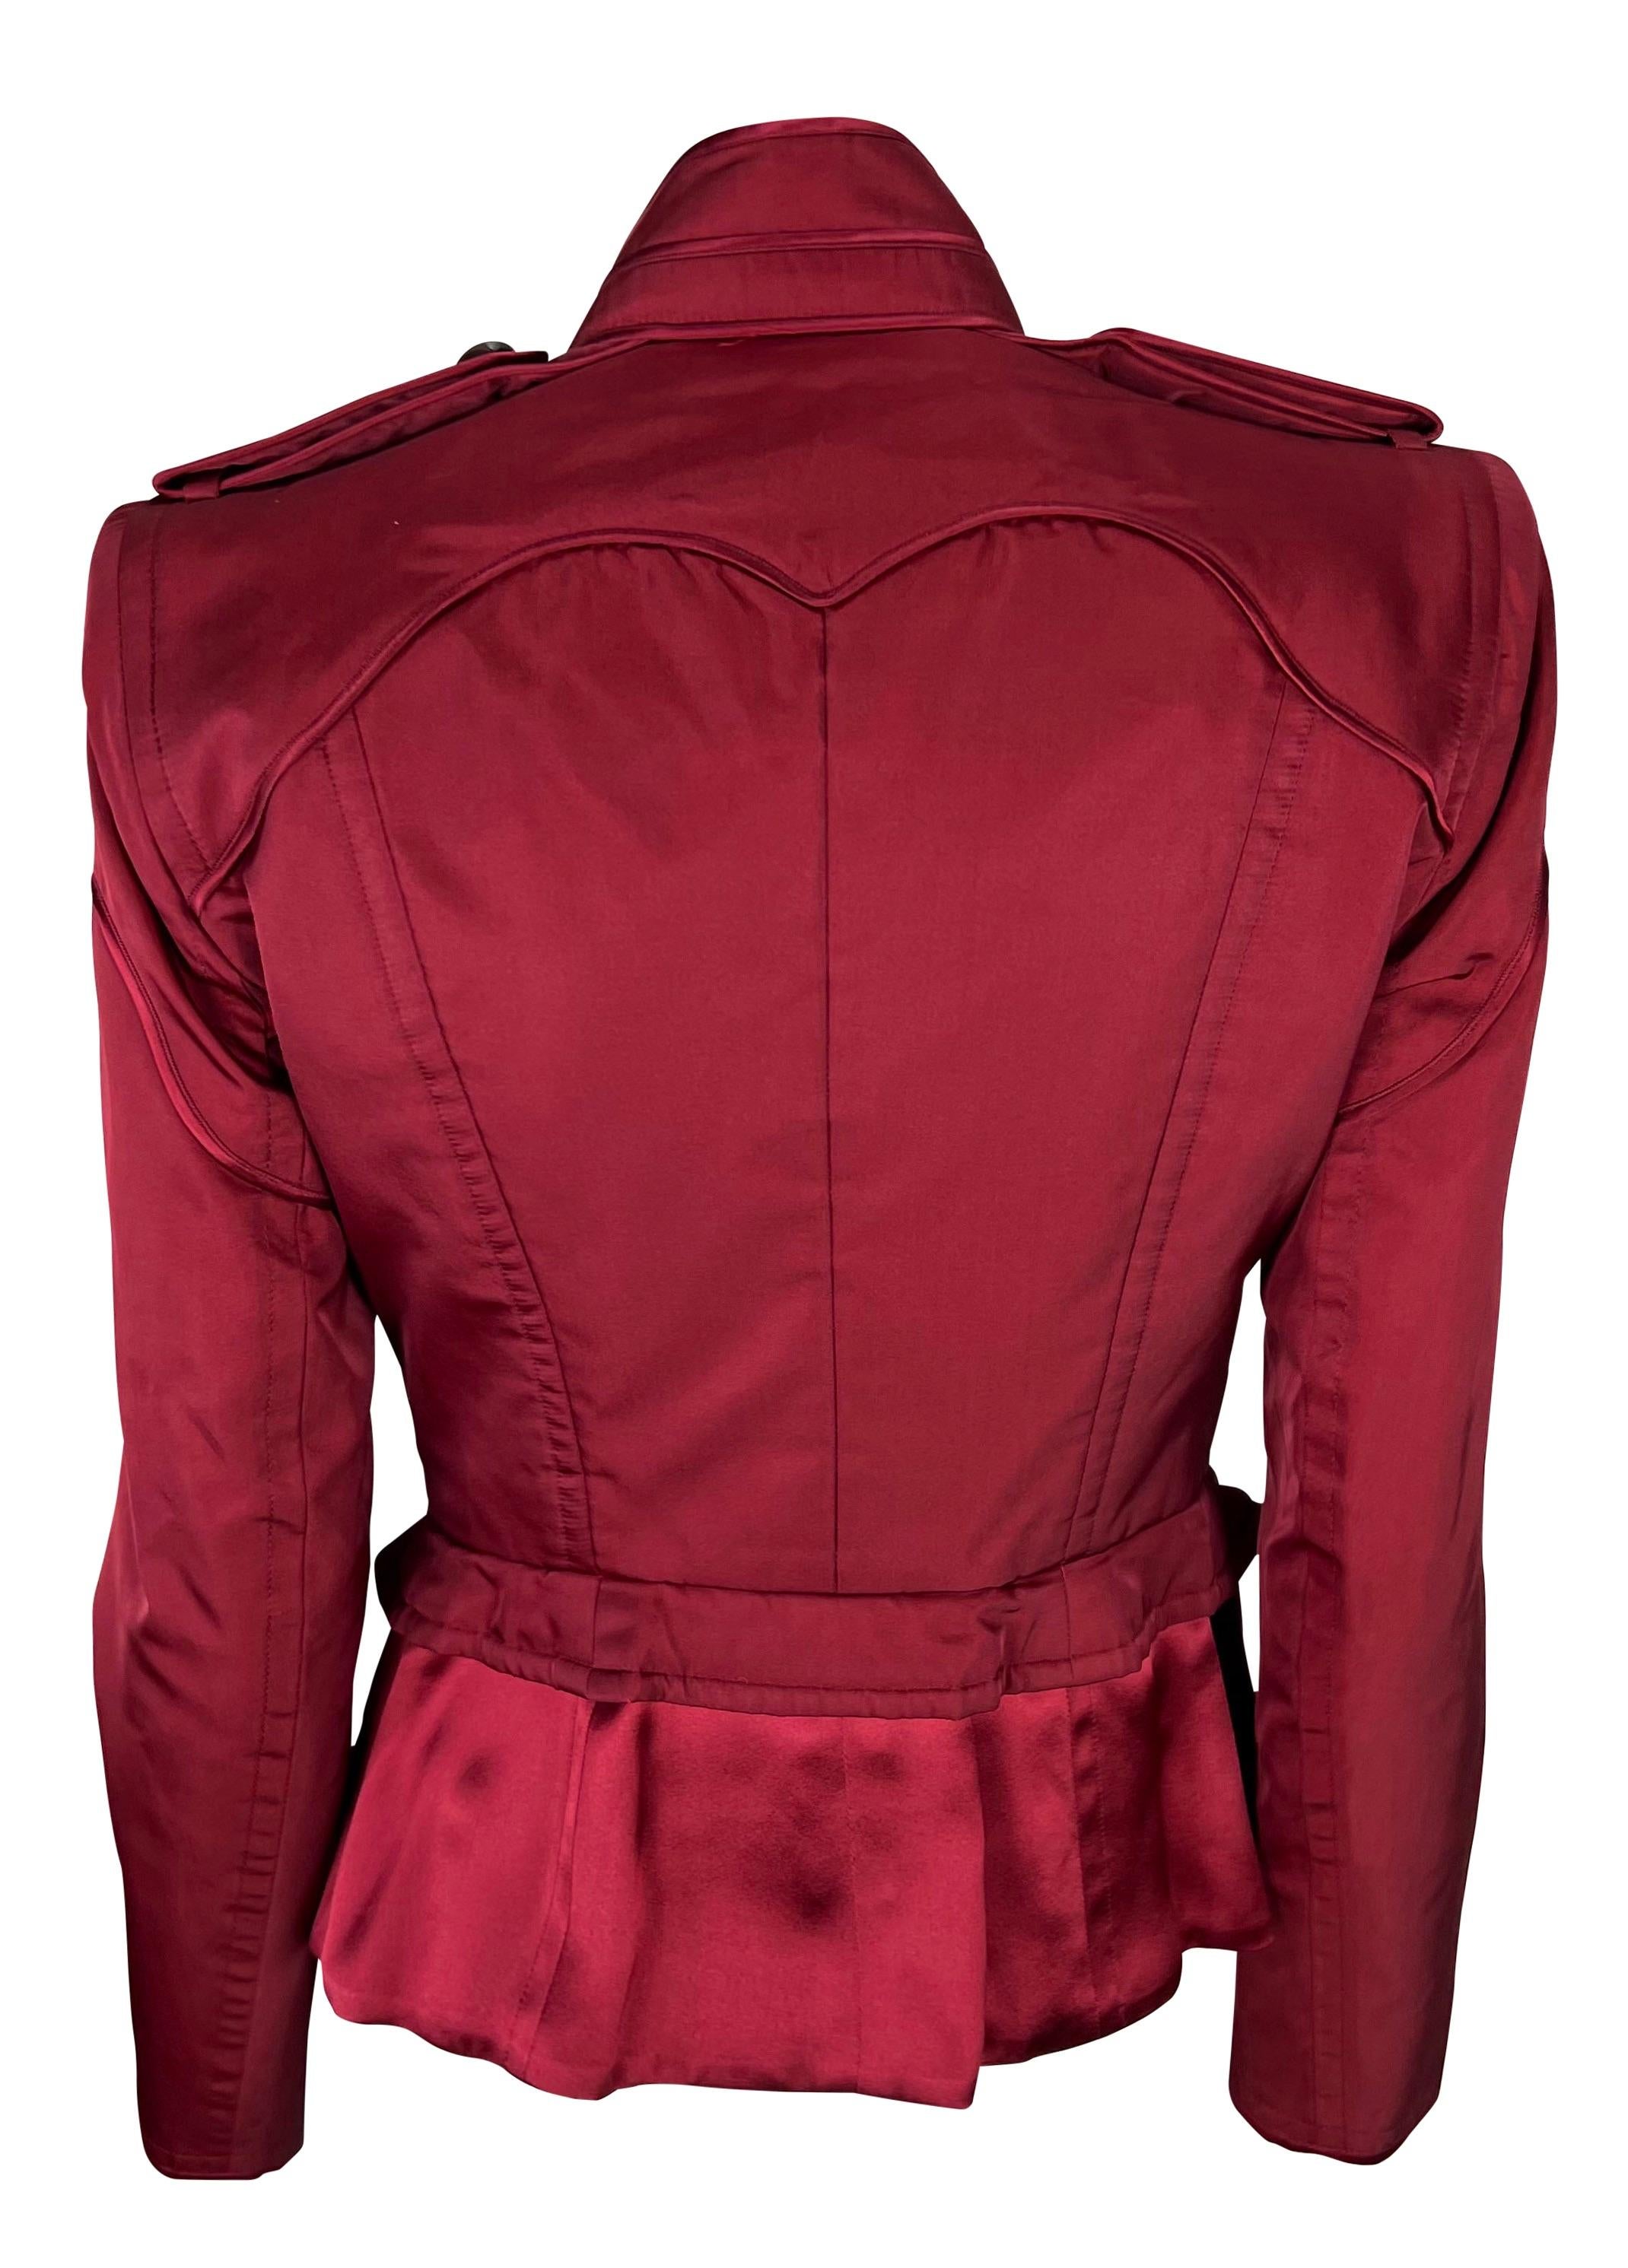 F/W 2004 Yves Saint Laurent by Tom Ford Runway Red Silk Satin Cropped Jacket For Sale 2